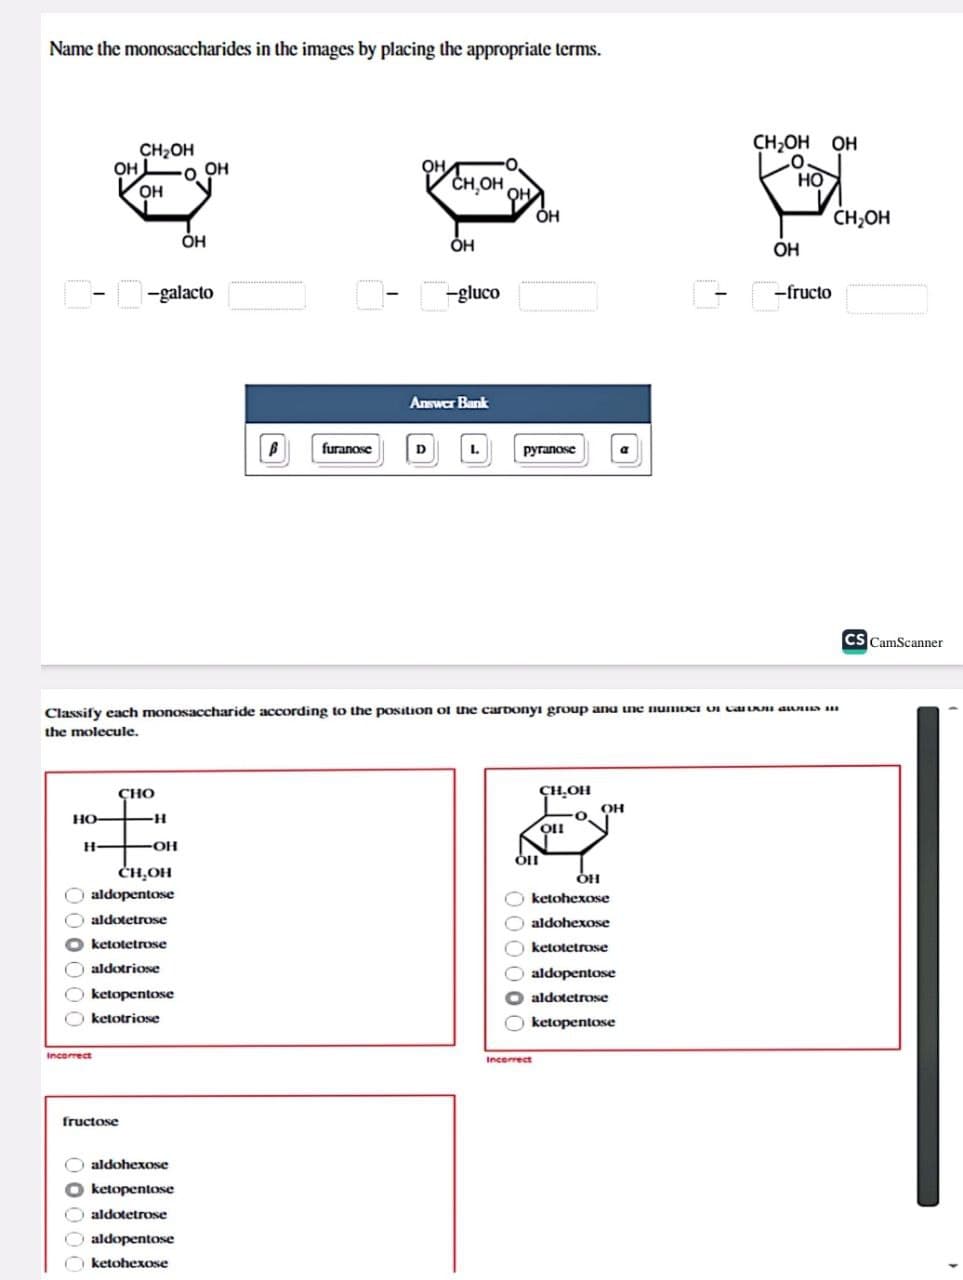 Name the monosaccharides in the images by placing the appropriate terms.
HO-
H
OH
|- |-galacto
000
Incorrect
CH₂OH
OH
00000
CH₂OH
aldopentose
aldotetrose
ketotetrose
aldotriose
Oketopentose
Oketotriose
fructose
CHO
-H
-OH
O OH
aldohexose
Oketopentose
Ⓒaldotetrose
OH
aldopentose
ketohexose
OHT
B furanose
OH
0- --gluco
CH,OH
Answer Bank
D
Classify each monosaccharide according to the position of the carbonyi group and the number of cards
the molecule.
L
OH
pyranose
OH
00000
CH₂OH
OLI
Incorrect
OIL
OH
ketohexose
aldohexose
ketotetrose
aldopentose
Oaldotetrose
ketopentose
a
OH
CH₂OH OH
O
HO
OH
-fructo
CH₂OH
CS CamScanner